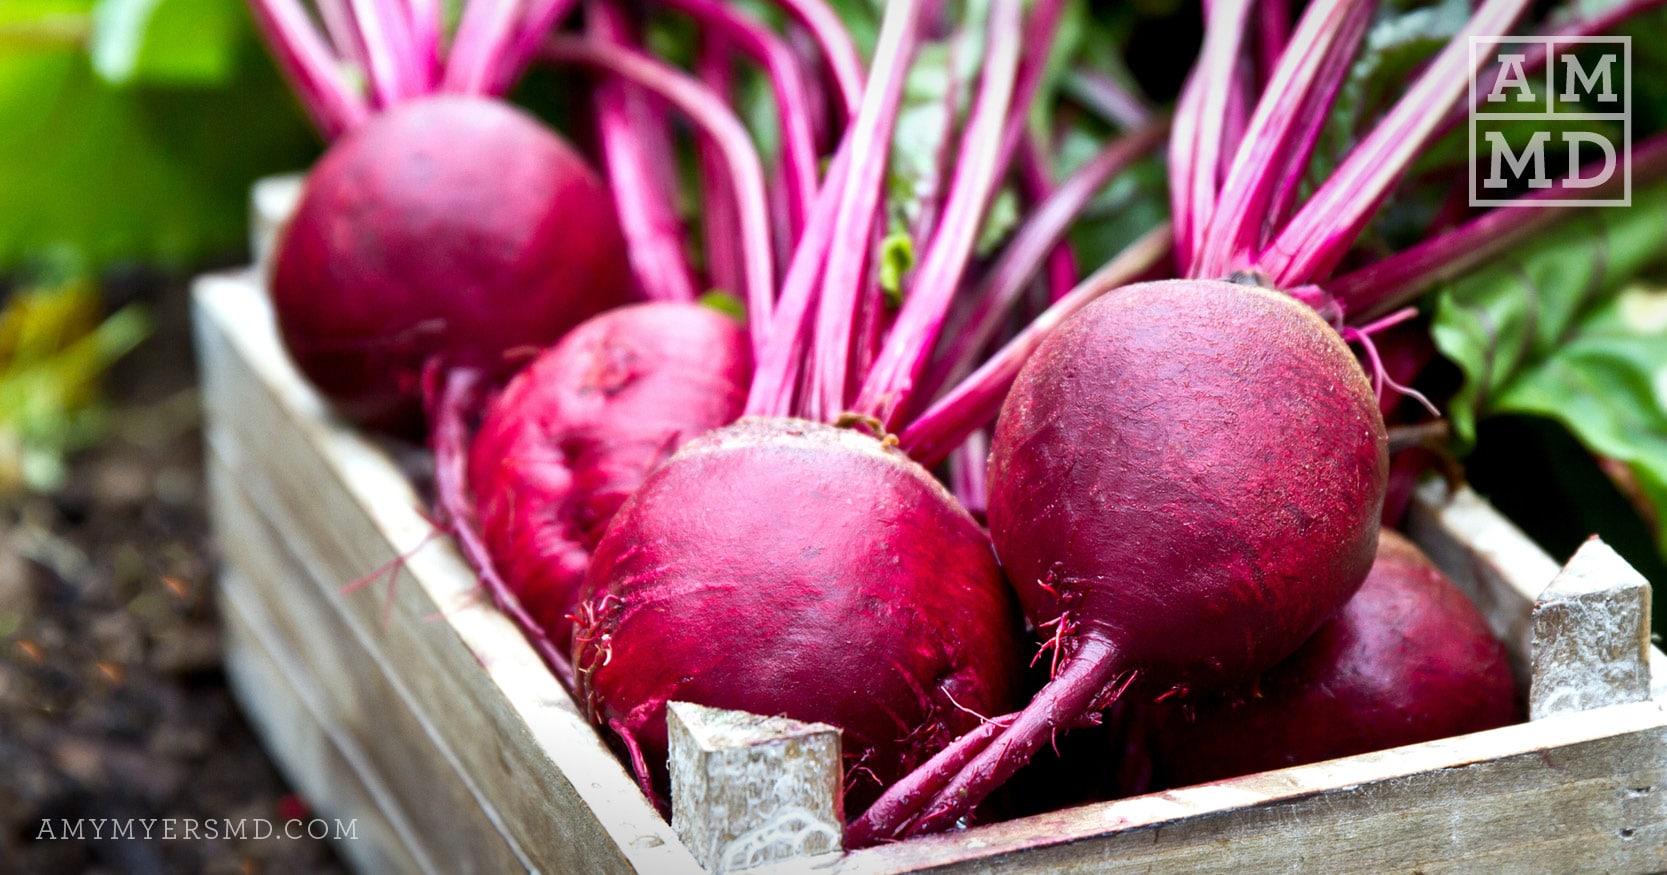 Beets - The Benefits of Beets - Amy Myers MD